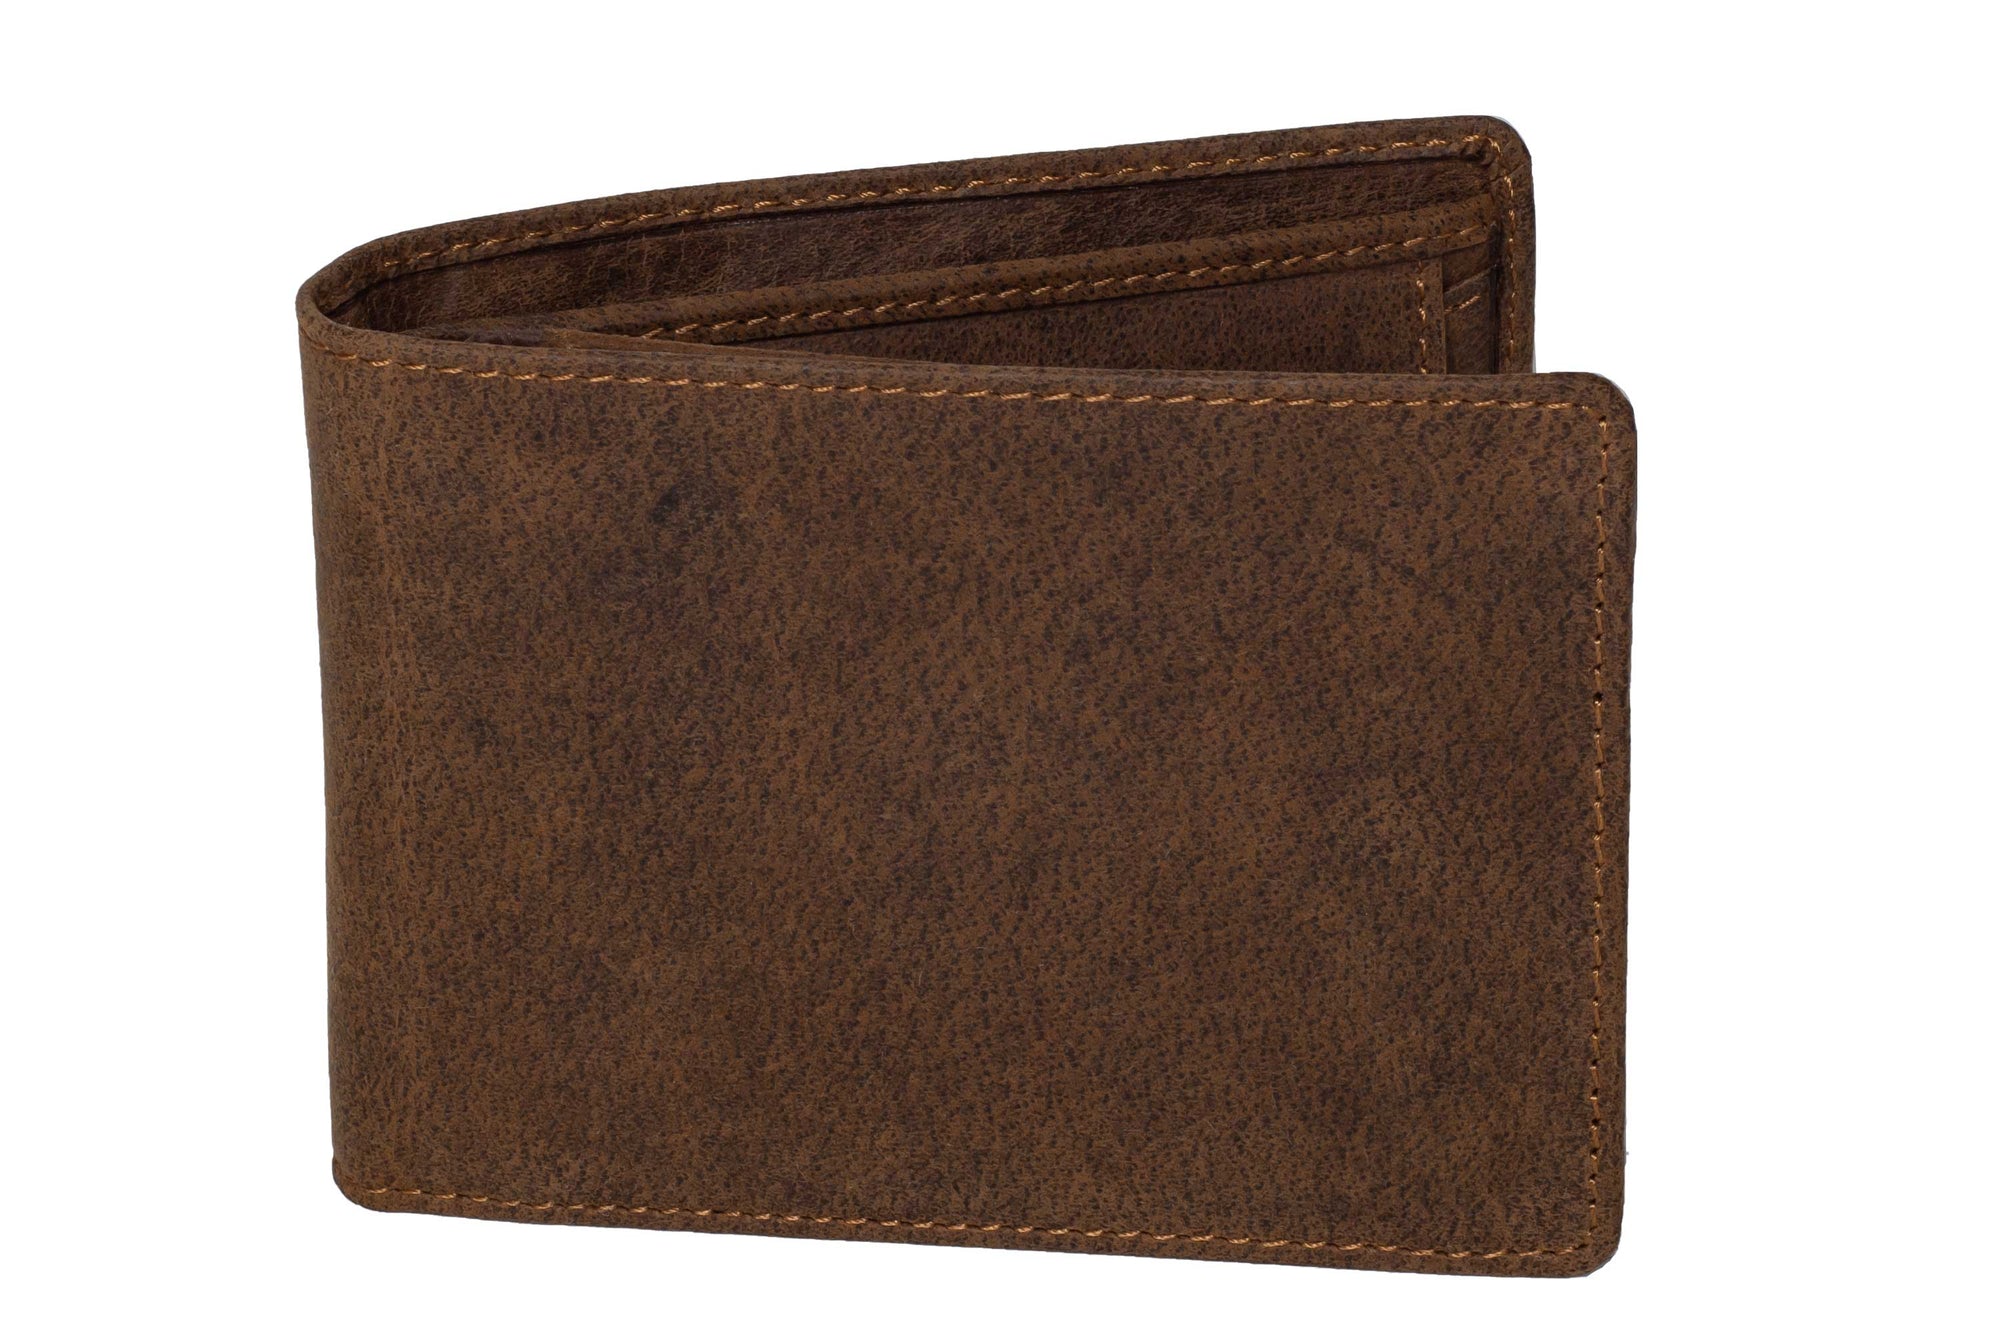 DiLoro Italy Men's Leather Wallet RFID Blocking Genuine Full Grain, Vegetable Tanned Leather, Bifold Flip Coin Wallet with RFID Blocking Technology to Protect your from Identity Theft, Dark Hunter Brown - Front View